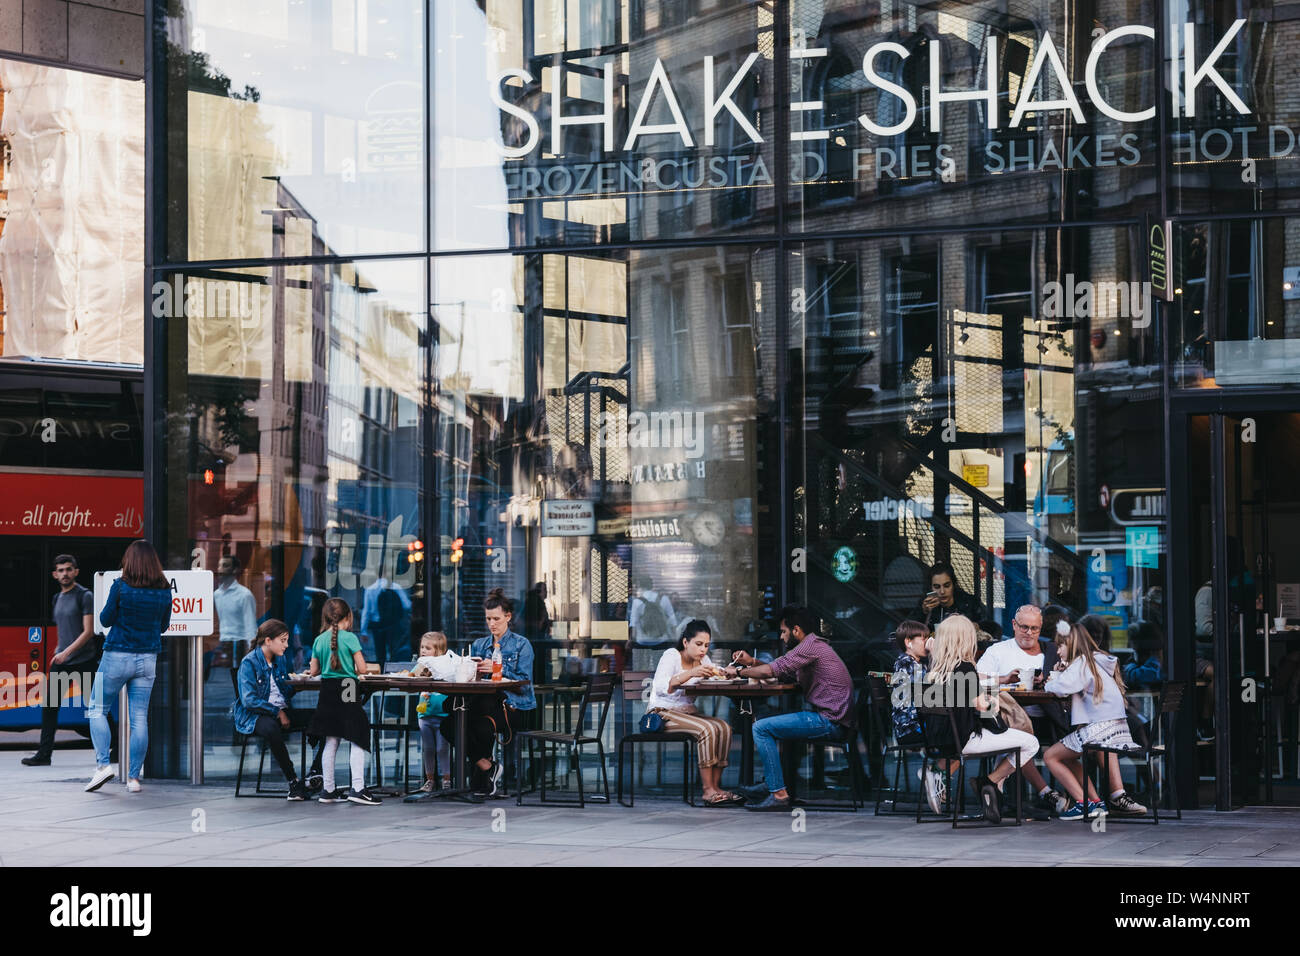 London, UK - July 15, 2019: People sitting at the outdoor tables of Shake Shack in Victoria station. Shake Shack is an American fast food restaurant c Stock Photo